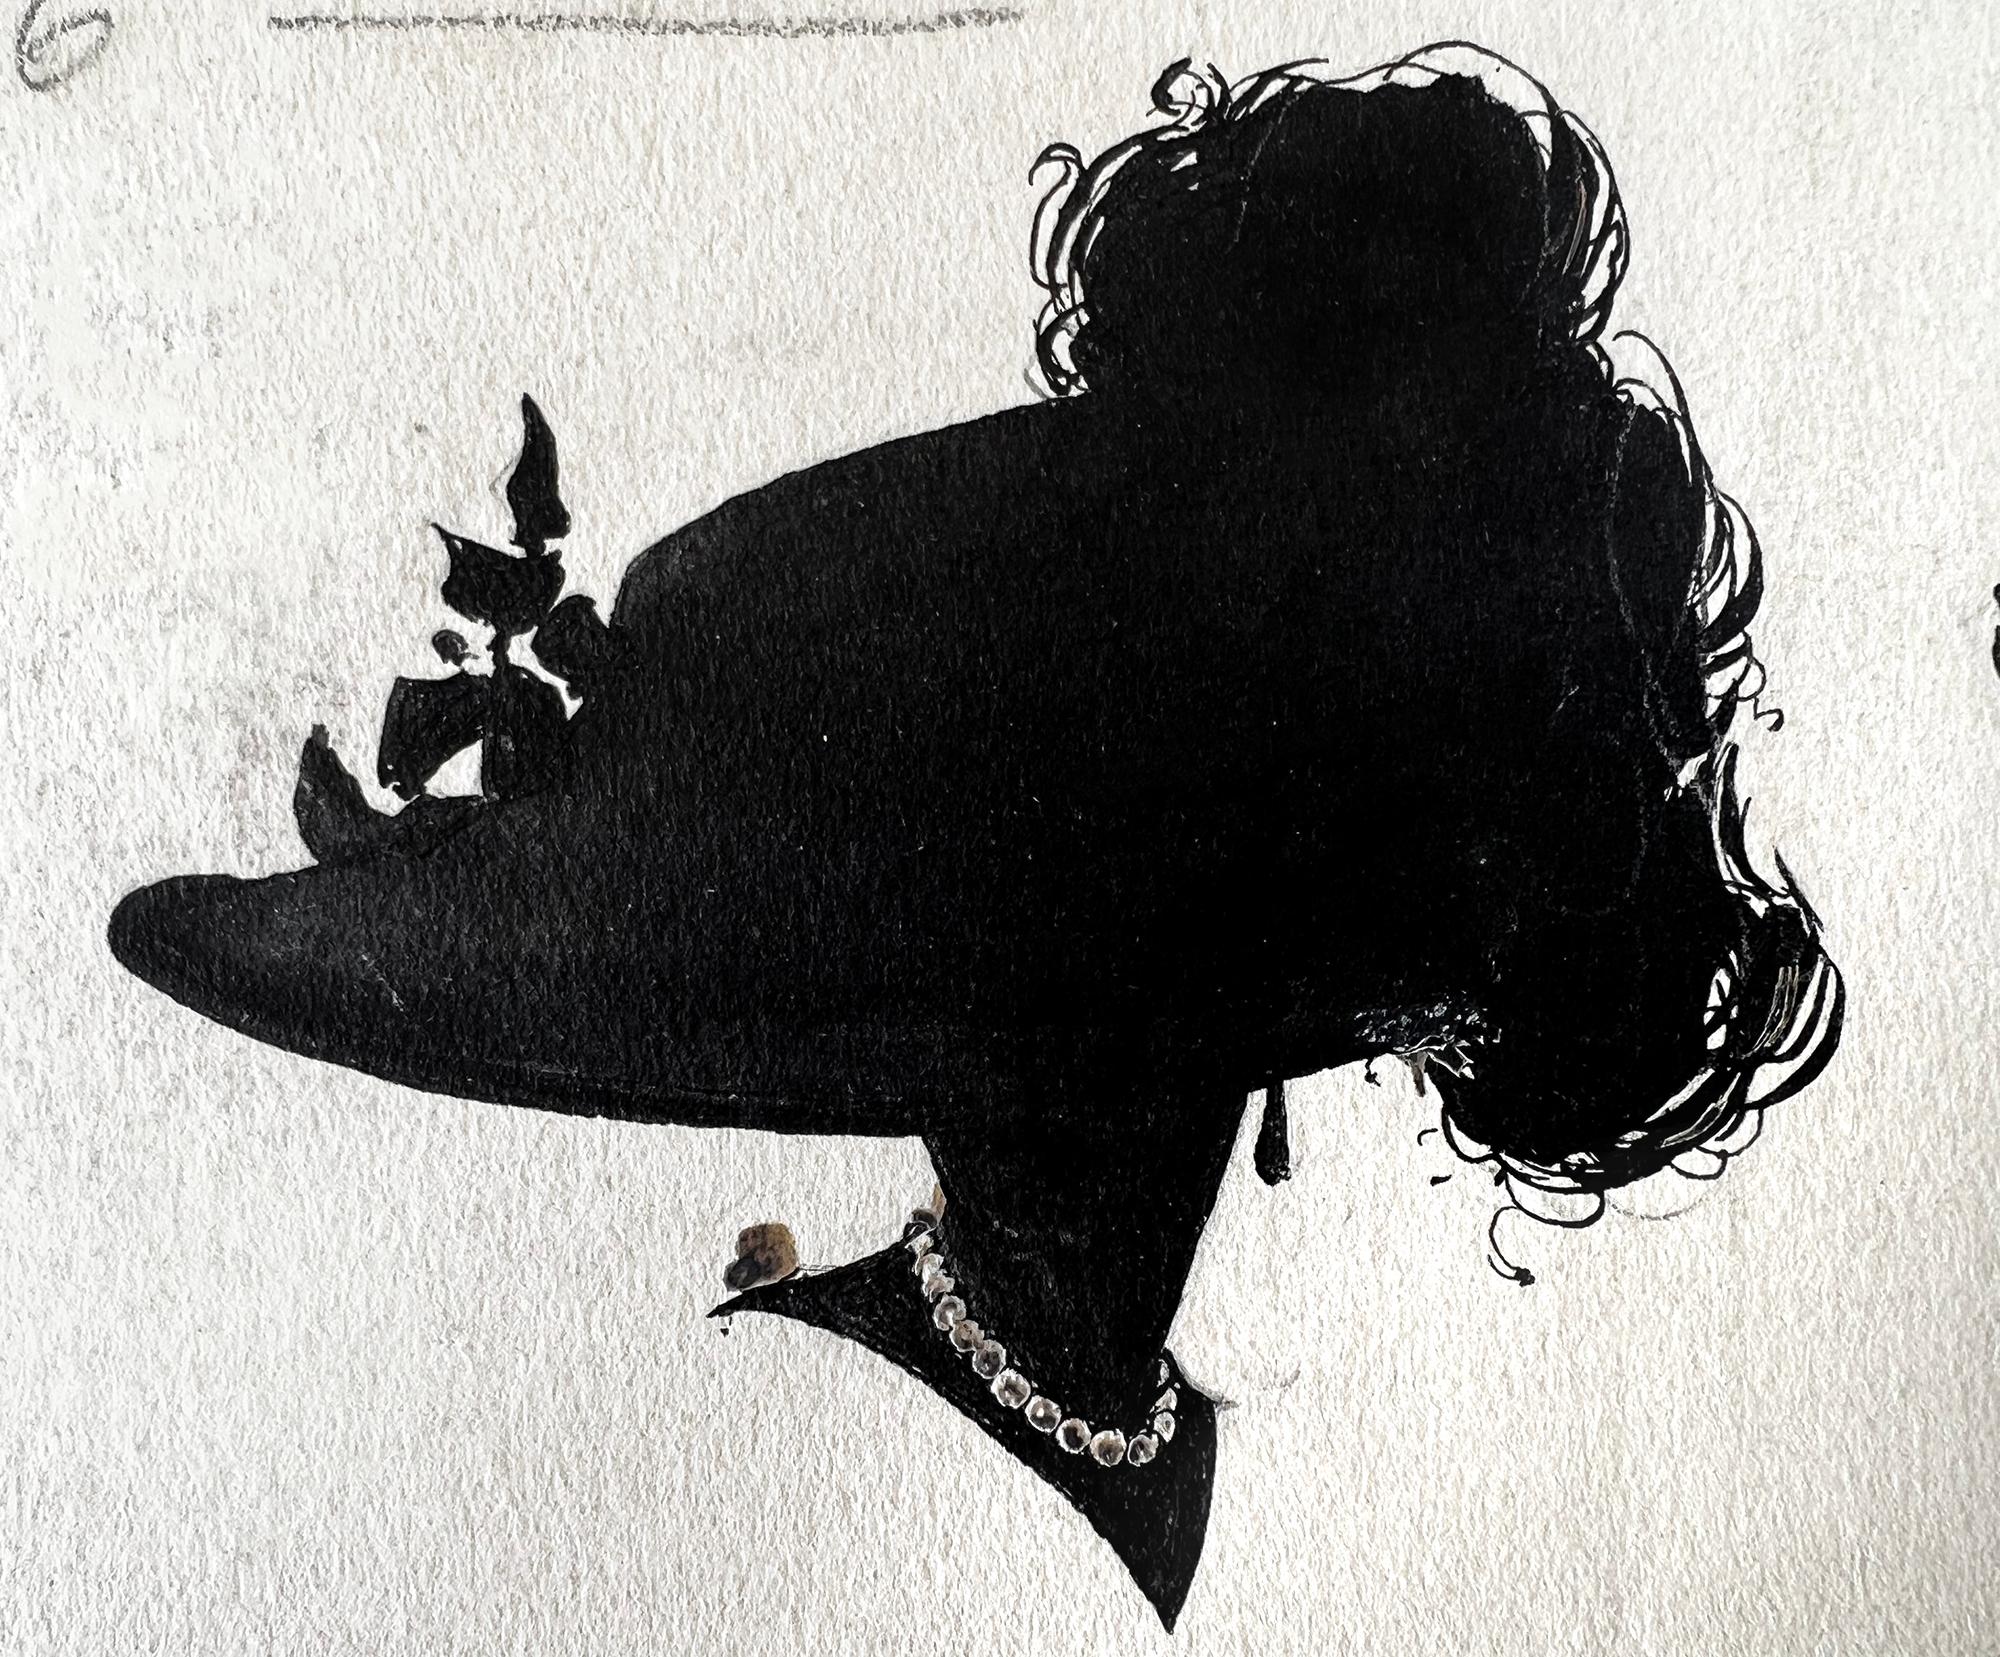 
115 years after they were created, one can view these silhouettes differently than the artist’s intent. 
After all, the genesis of this work was an editorial illustration for Life Magazine to showcase elaborate women’s hats.
They were done for a